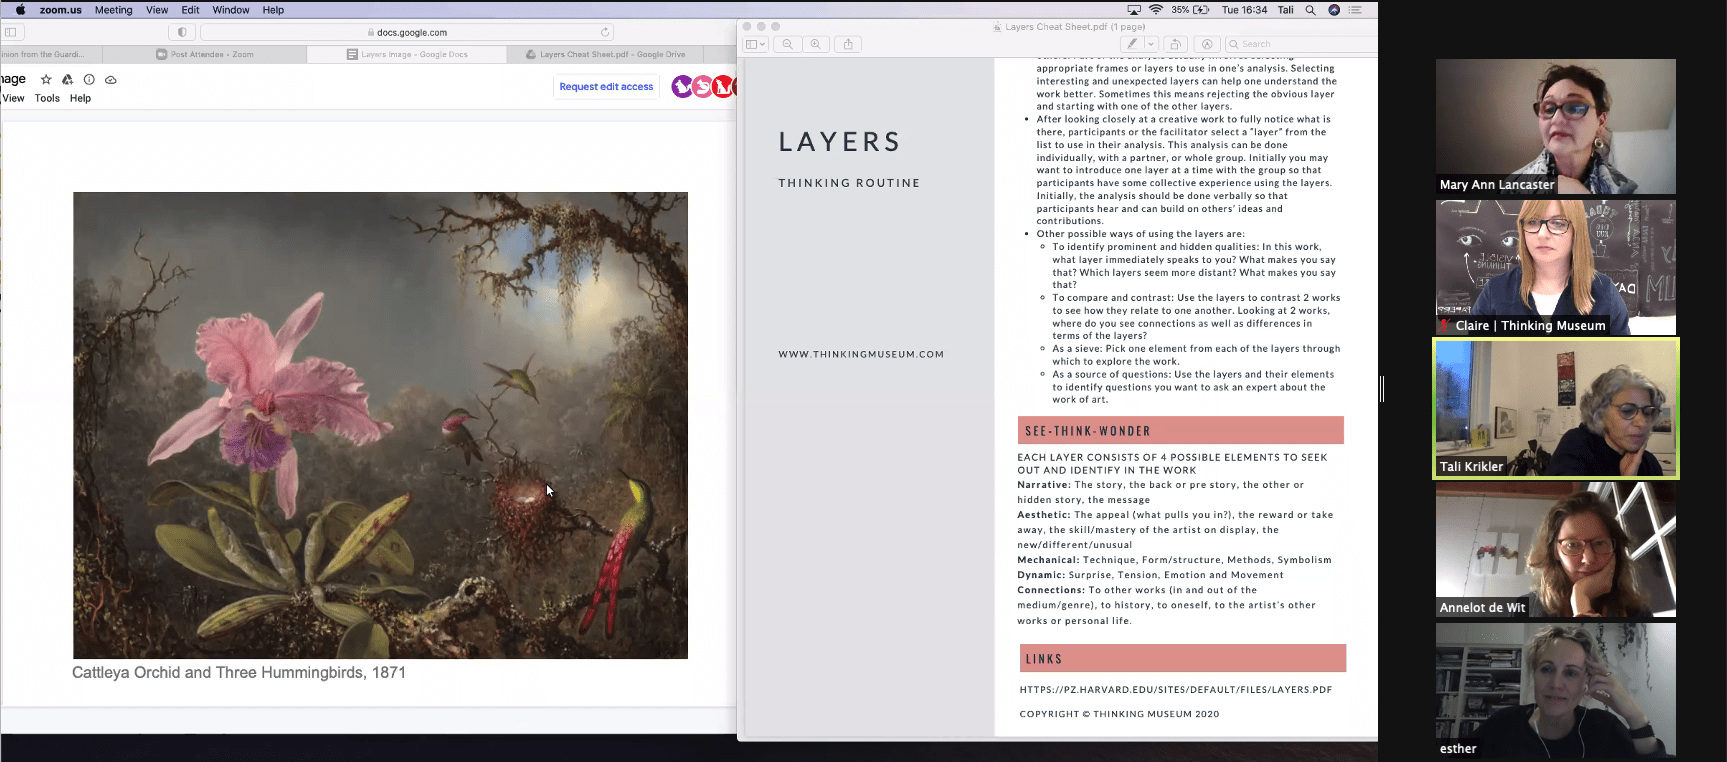 How to Use Layers Thinking Routine to Analyse Artworks